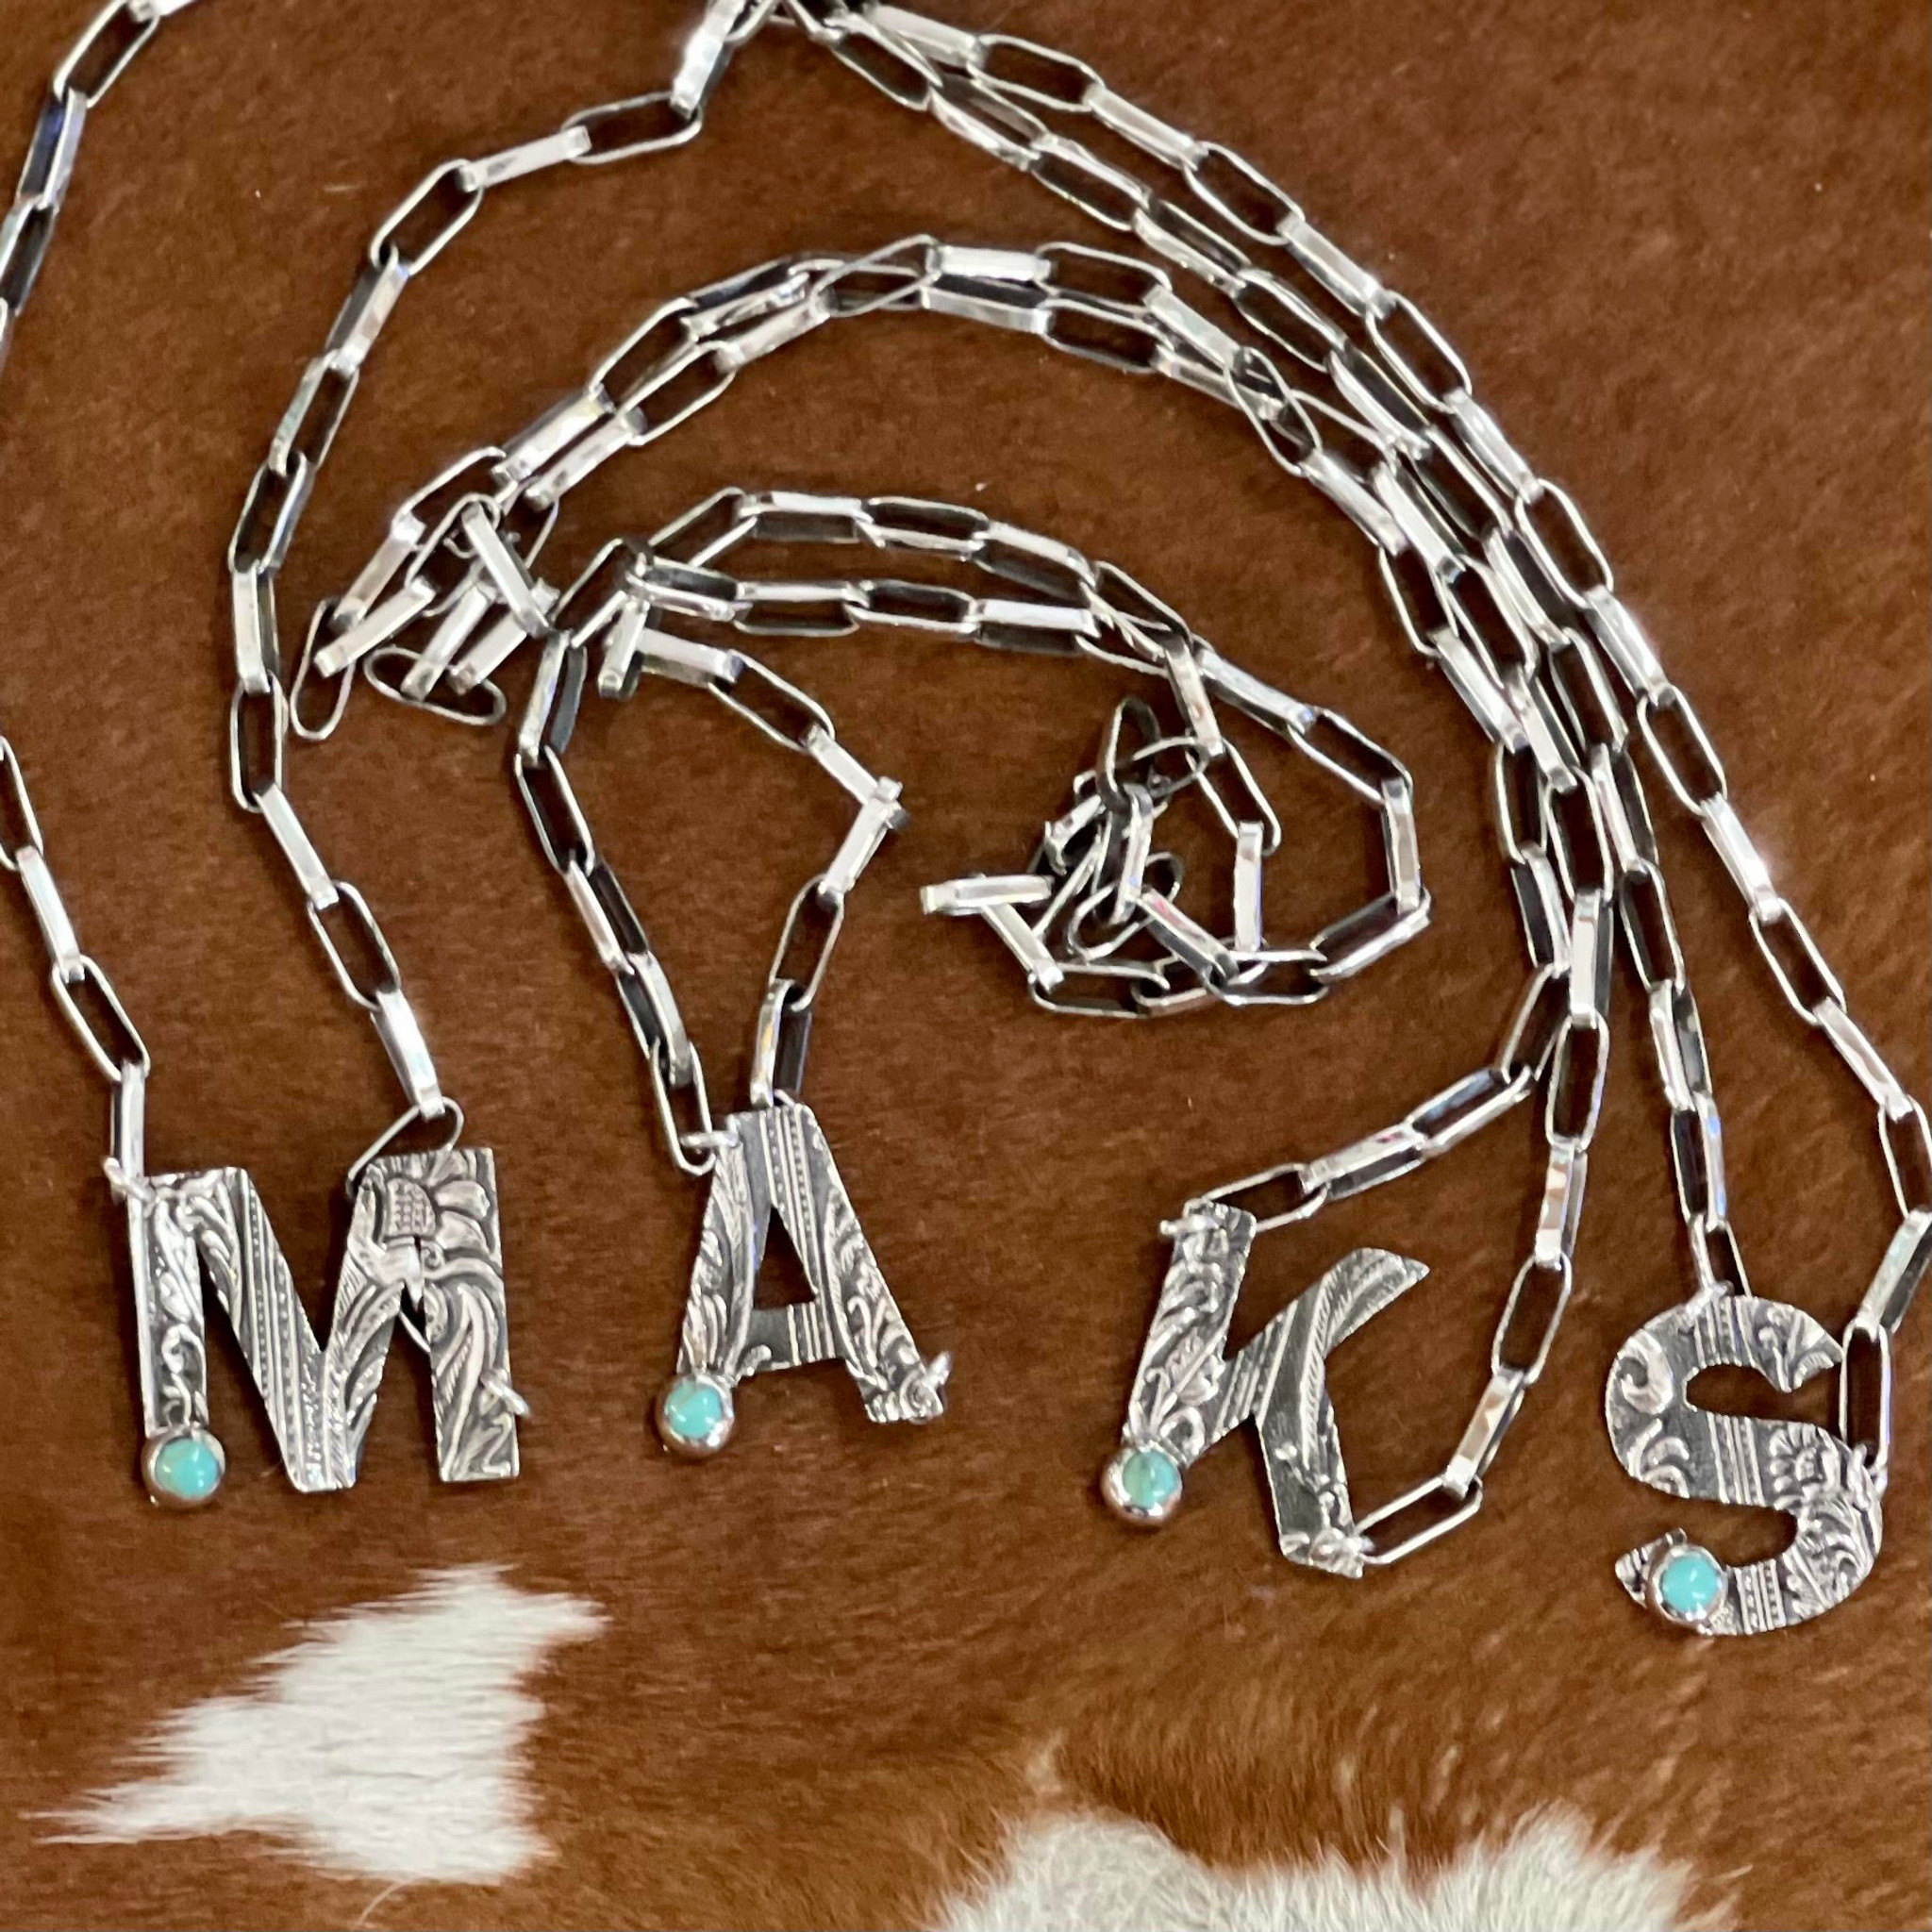 Attached Letters Necklace